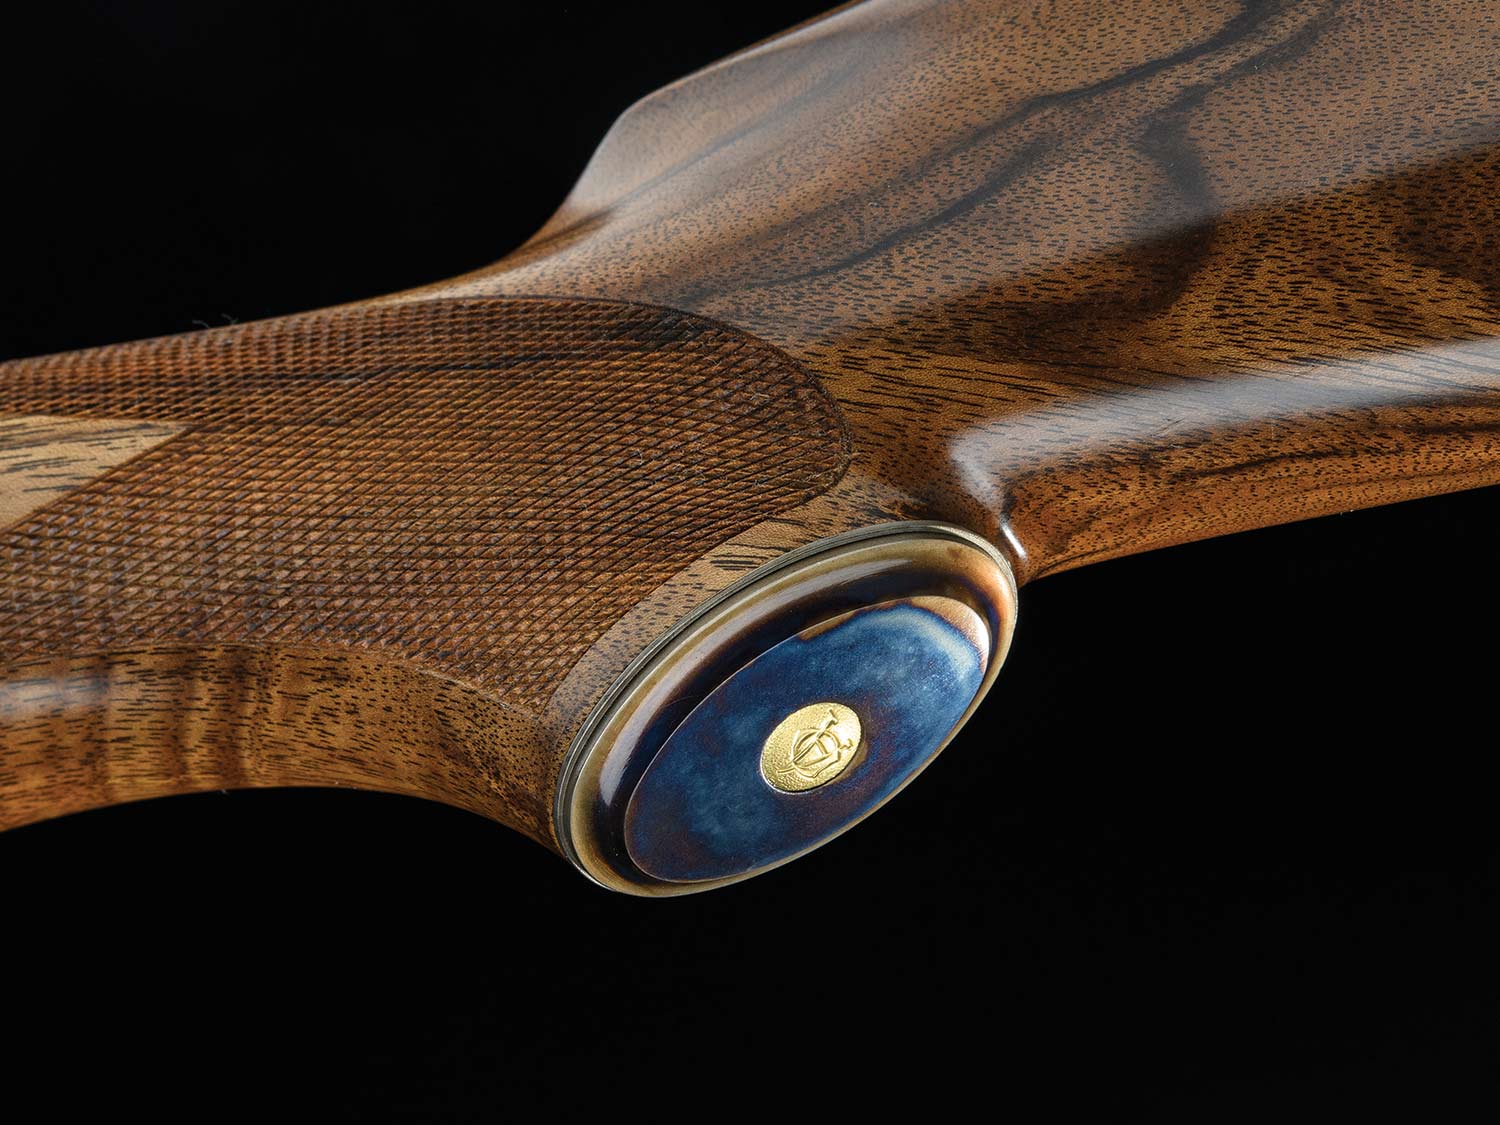 A case-colored grip cap on a rifle stock.